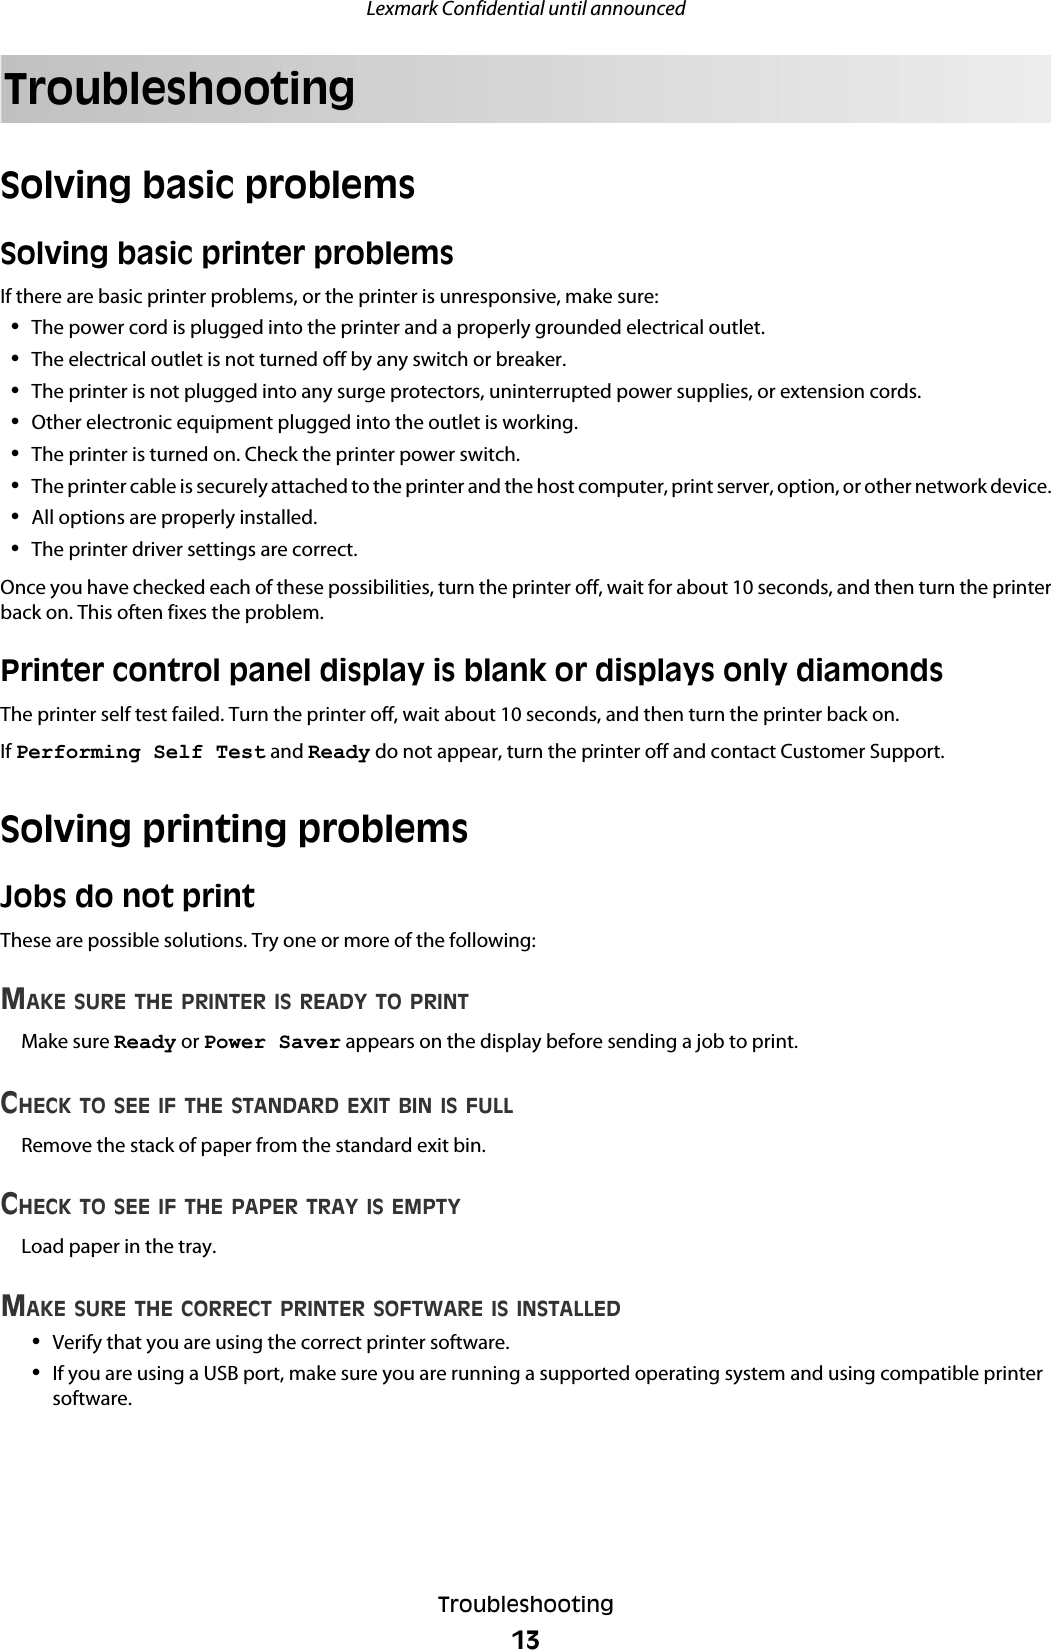 TroubleshootingSolving basic problemsSolving basic printer problemsIf there are basic printer problems, or the printer is unresponsive, make sure:•The power cord is plugged into the printer and a properly grounded electrical outlet.•The electrical outlet is not turned off by any switch or breaker.•The printer is not plugged into any surge protectors, uninterrupted power supplies, or extension cords.•Other electronic equipment plugged into the outlet is working.•The printer is turned on. Check the printer power switch.•The printer cable is securely attached to the printer and the host computer, print server, option, or other network device.•All options are properly installed.•The printer driver settings are correct.Once you have checked each of these possibilities, turn the printer off, wait for about 10 seconds, and then turn the printerback on. This often fixes the problem.Printer control panel display is blank or displays only diamondsThe printer self test failed. Turn the printer off, wait about 10 seconds, and then turn the printer back on.If Performing Self Test and Ready do not appear, turn the printer off and contact Customer Support.Solving printing problemsJobs do not printThese are possible solutions. Try one or more of the following:MAKE SURE THE PRINTER IS READY TO PRINTMake sure Ready or Power Saver appears on the display before sending a job to print.CHECK TO SEE IF THE STANDARD EXIT BIN IS FULLRemove the stack of paper from the standard exit bin.CHECK TO SEE IF THE PAPER TRAY IS EMPTYLoad paper in the tray.MAKE SURE THE CORRECT PRINTER SOFTWARE IS INSTALLED•Verify that you are using the correct printer software.•If you are using a USB port, make sure you are running a supported operating system and using compatible printersoftware.Lexmark Confidential until announcedTroubleshooting13